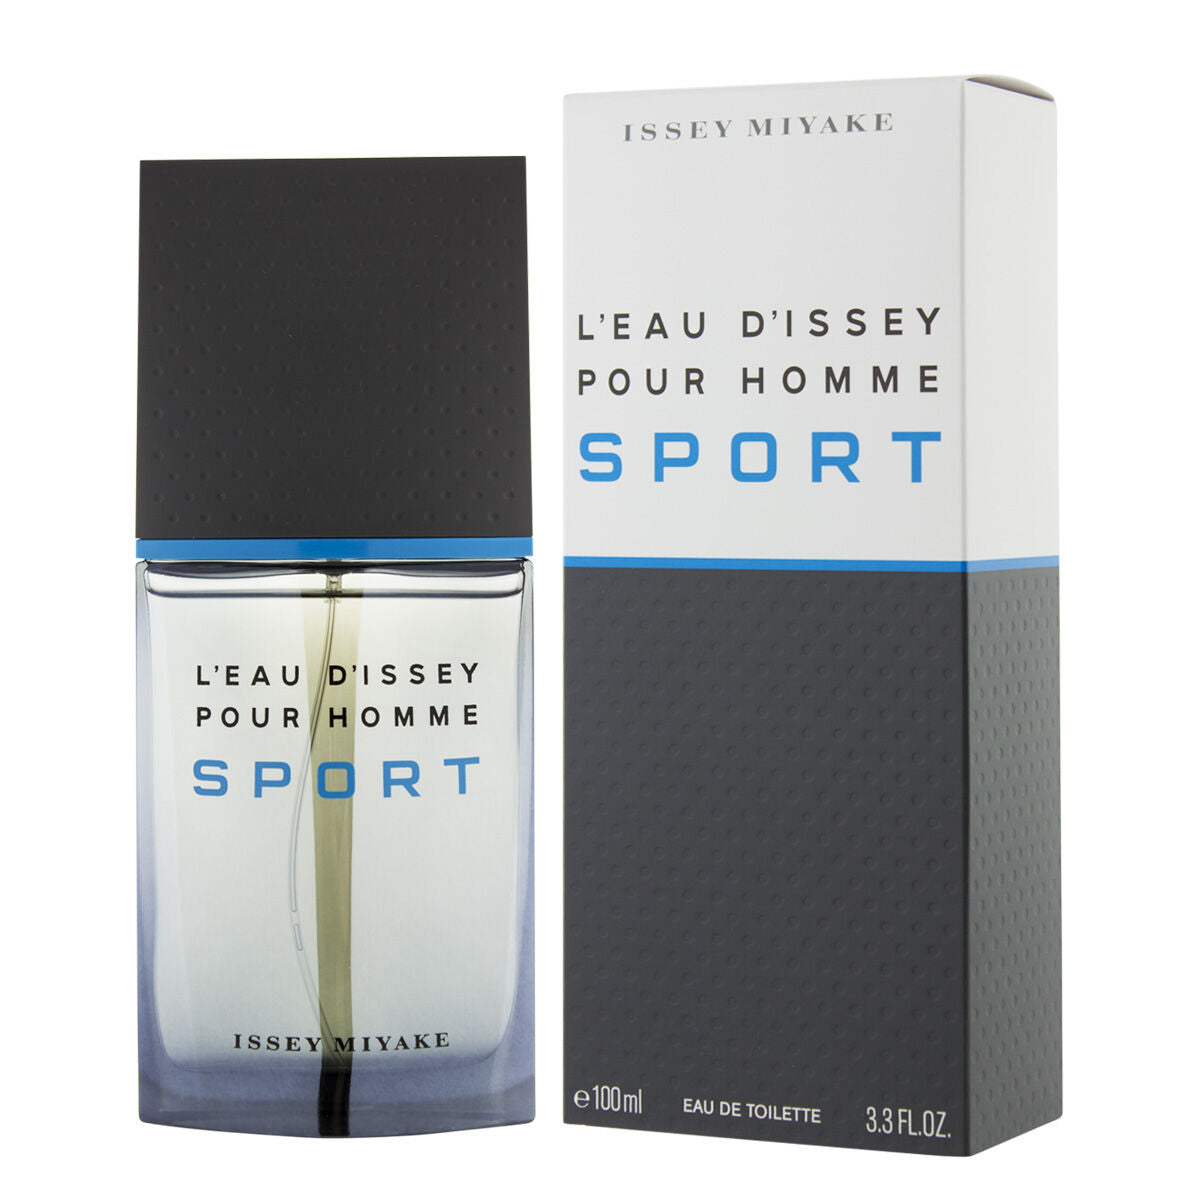 Herenparfum Issey Miyake EDT L'eau D'issey Pour Homme Sport 100 ml